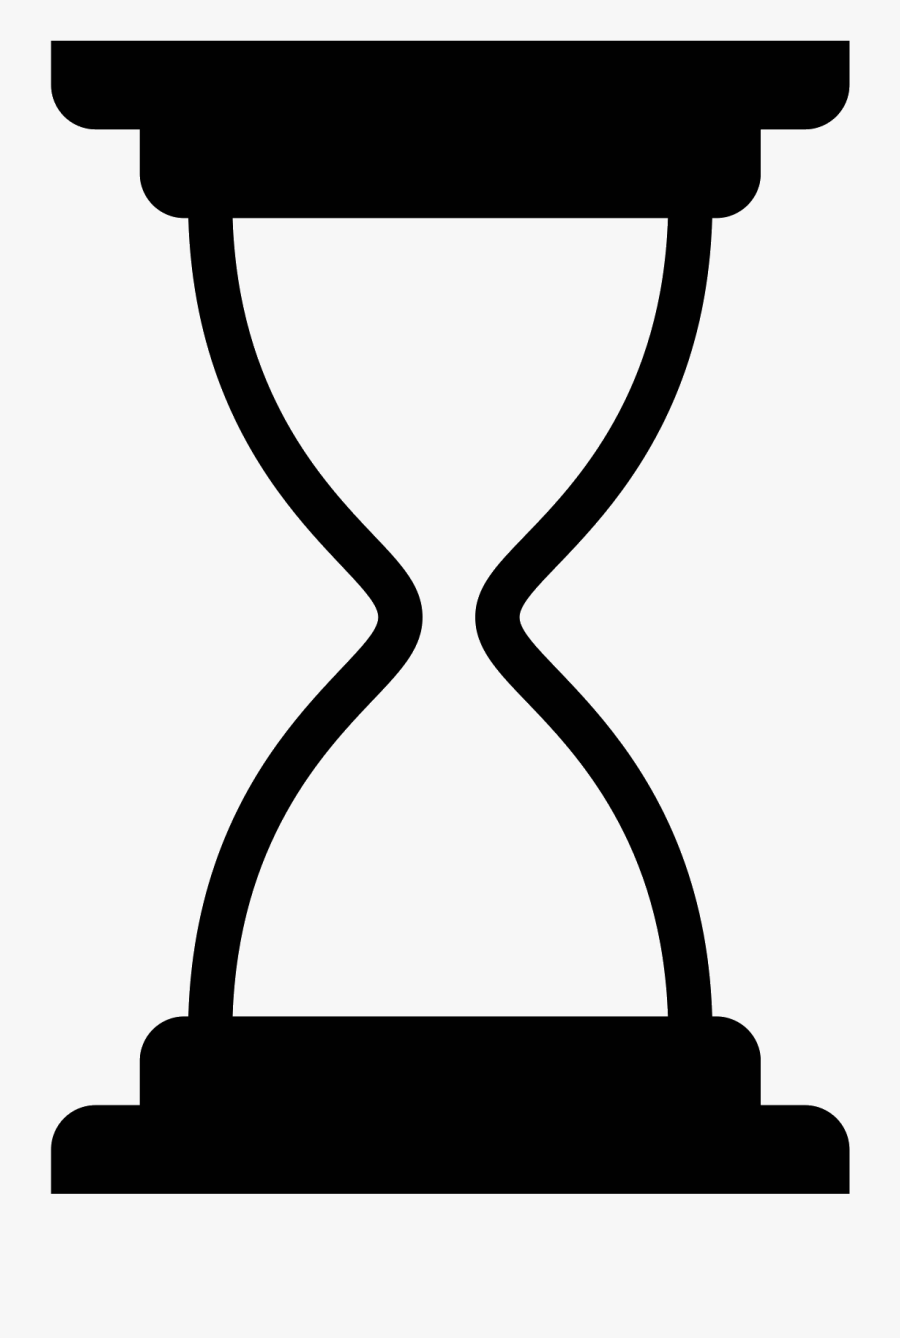 Hourglass Clipart Sand Timer - Sand Clock Icon Png , Free Transparent Clipa...